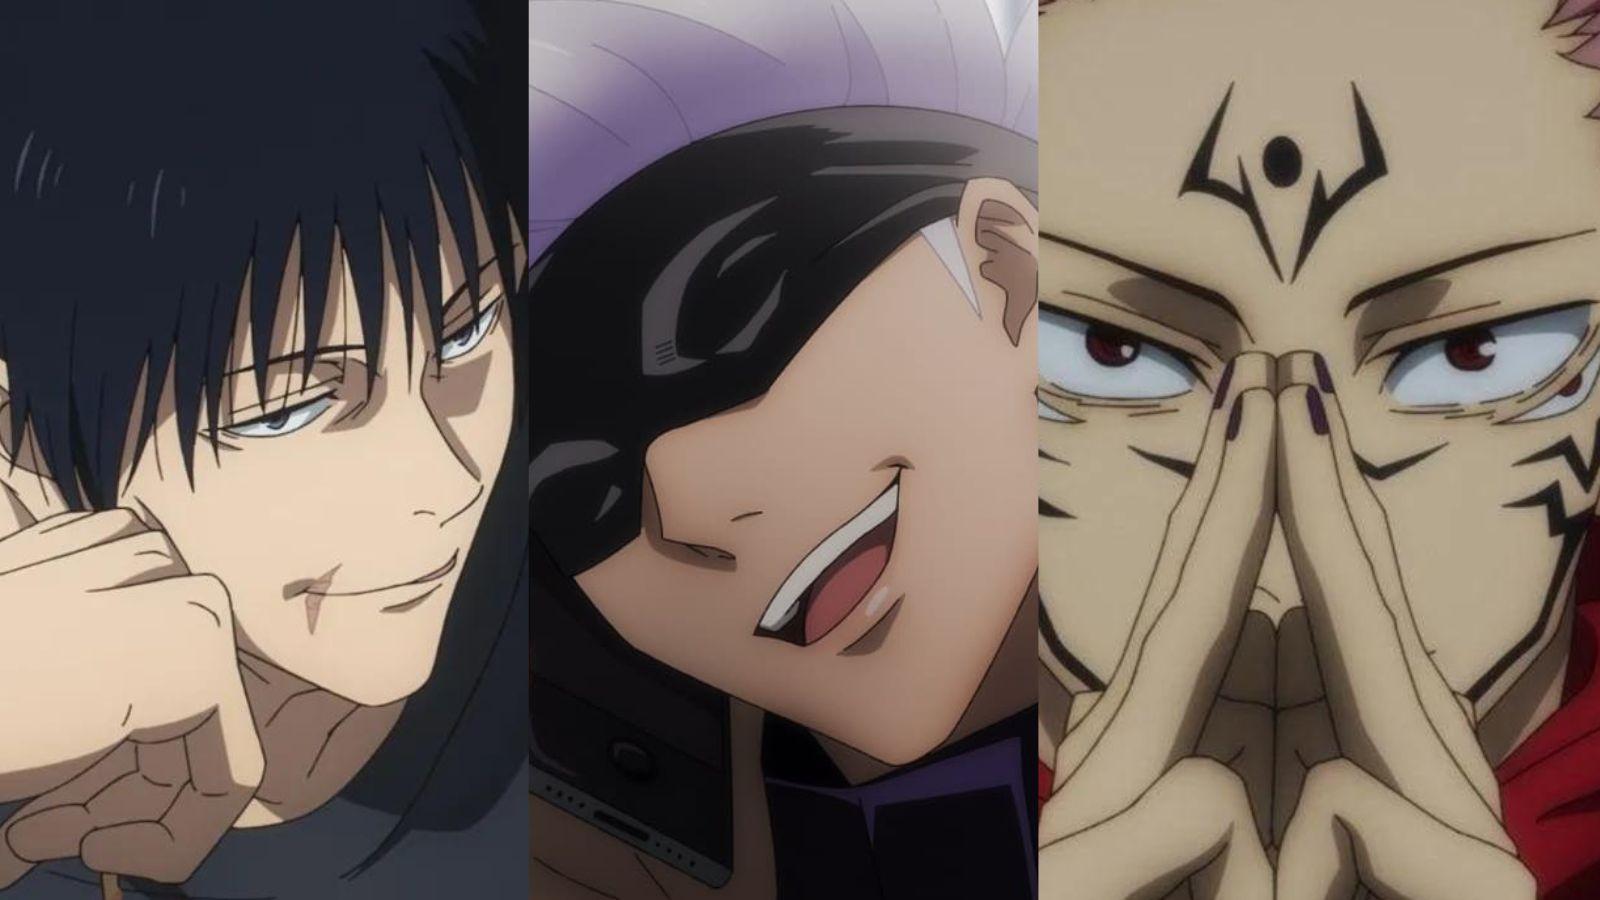 10 Strongest Power Systems In Anime, Ranked